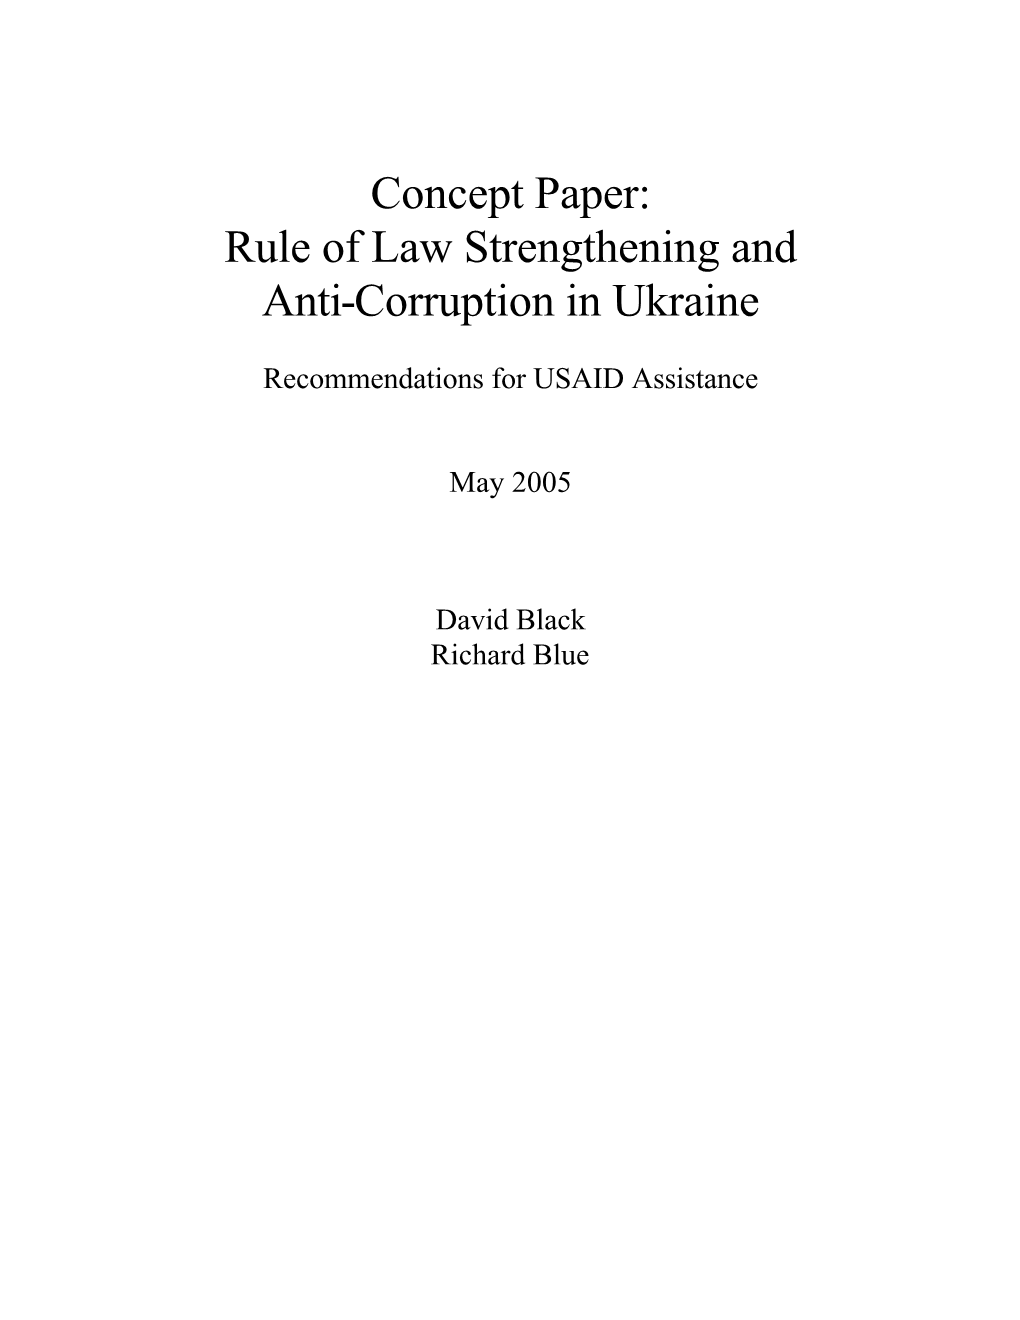 Concept Paper: Rule of Law Strengthening and Anti-Corruption in Ukraine